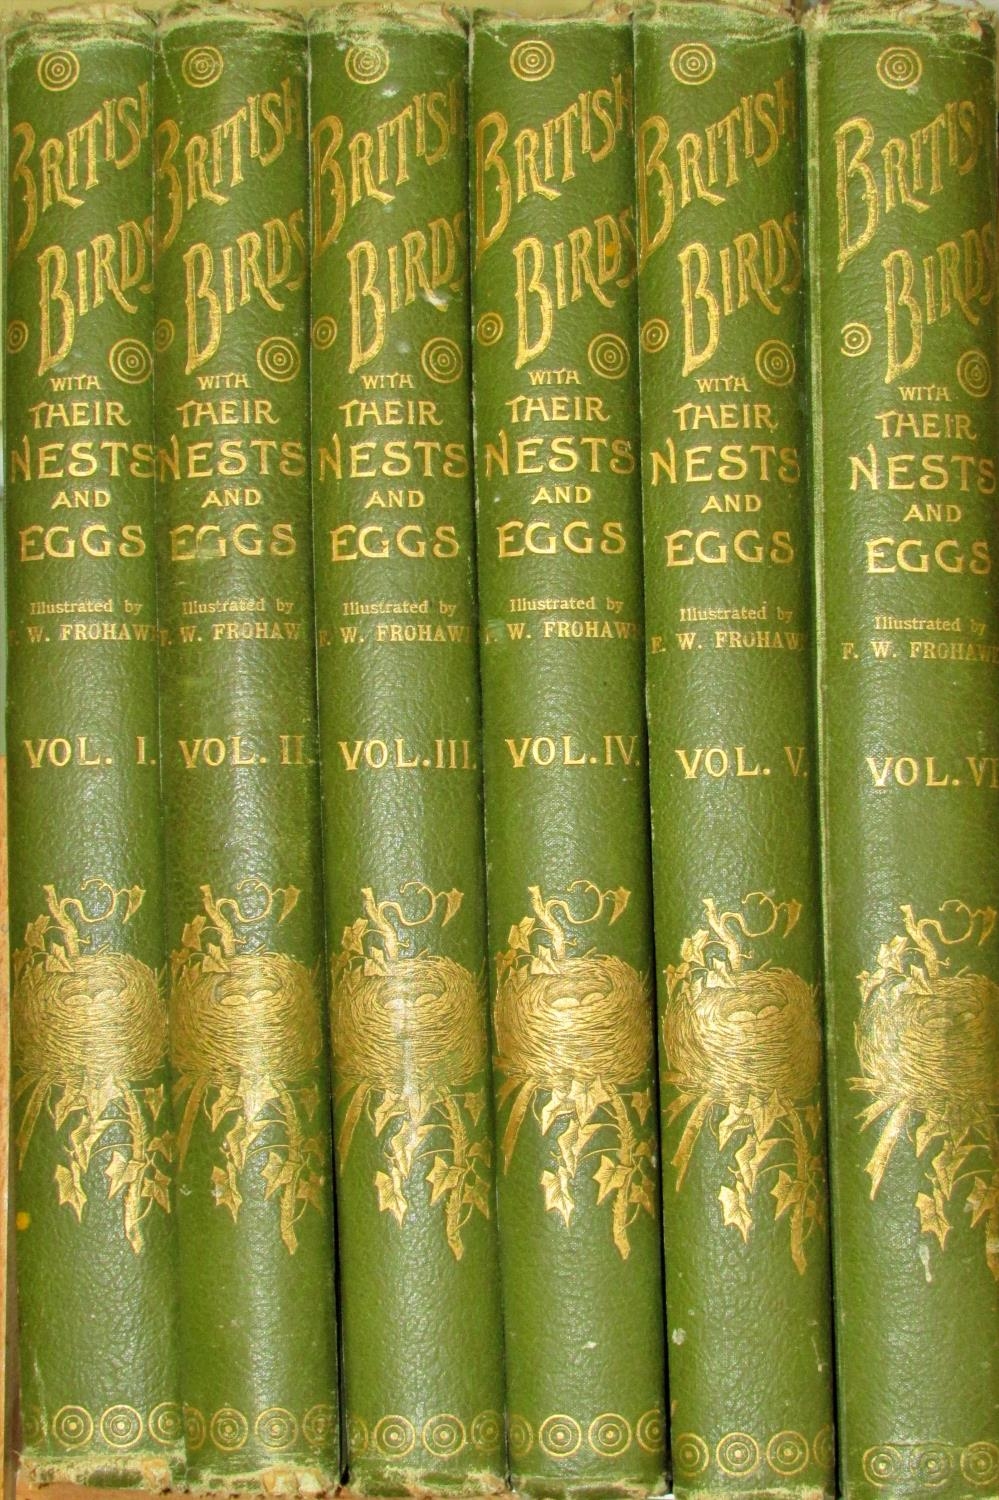 Arthur Butler British Birds with their Nests and Eggs, 1900, 5 vols, illustrated by F W Frohawk